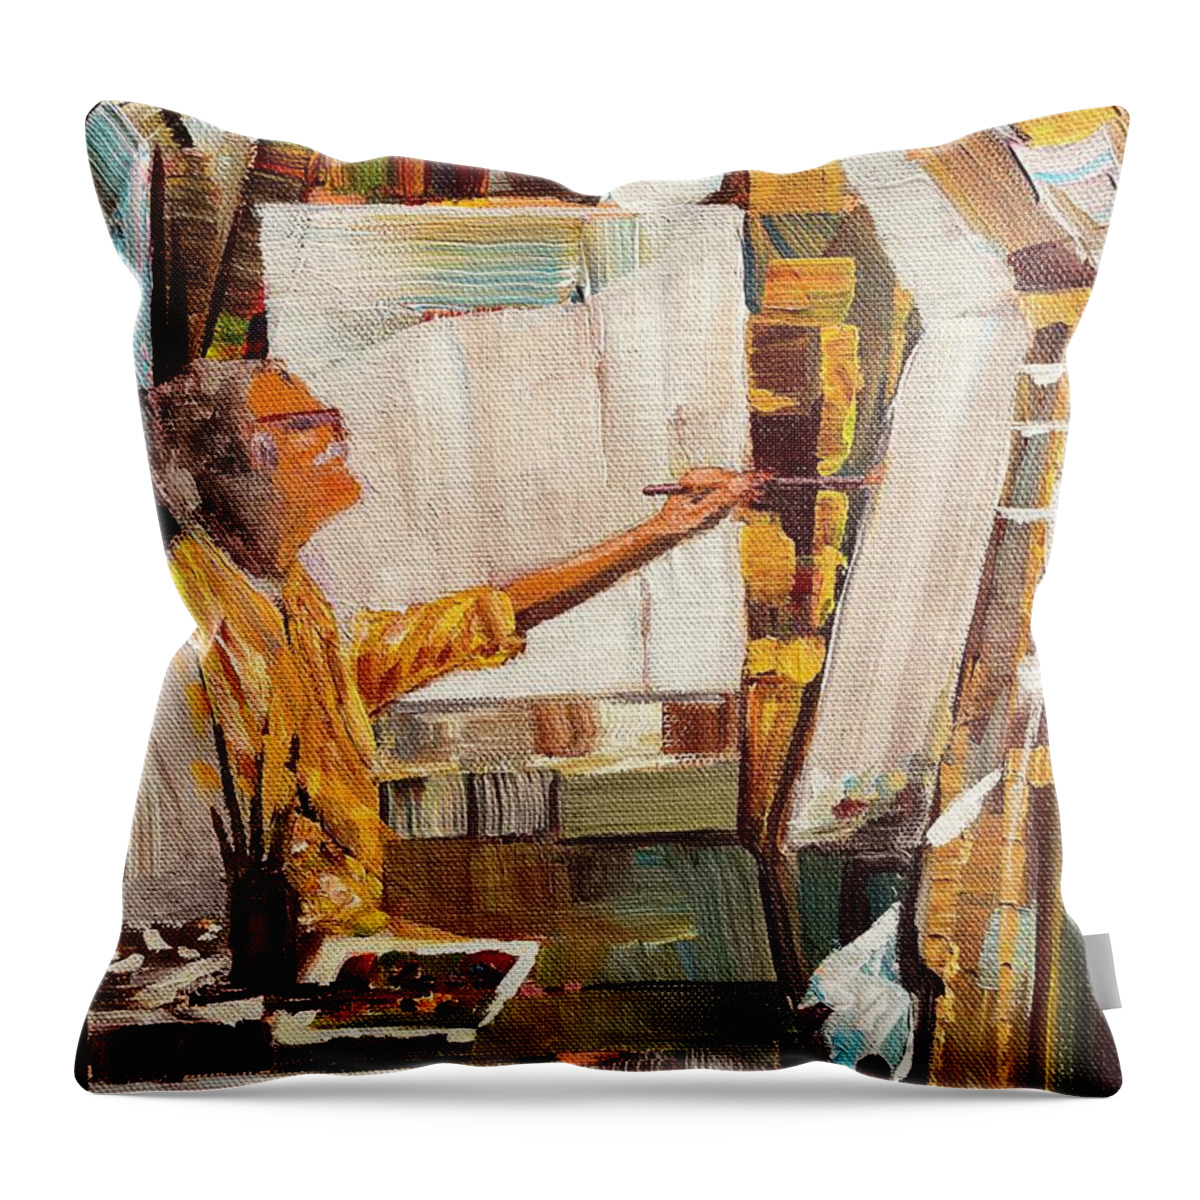 Artist Studio Throw Pillow featuring the painting Artist studio by Ray Khalife